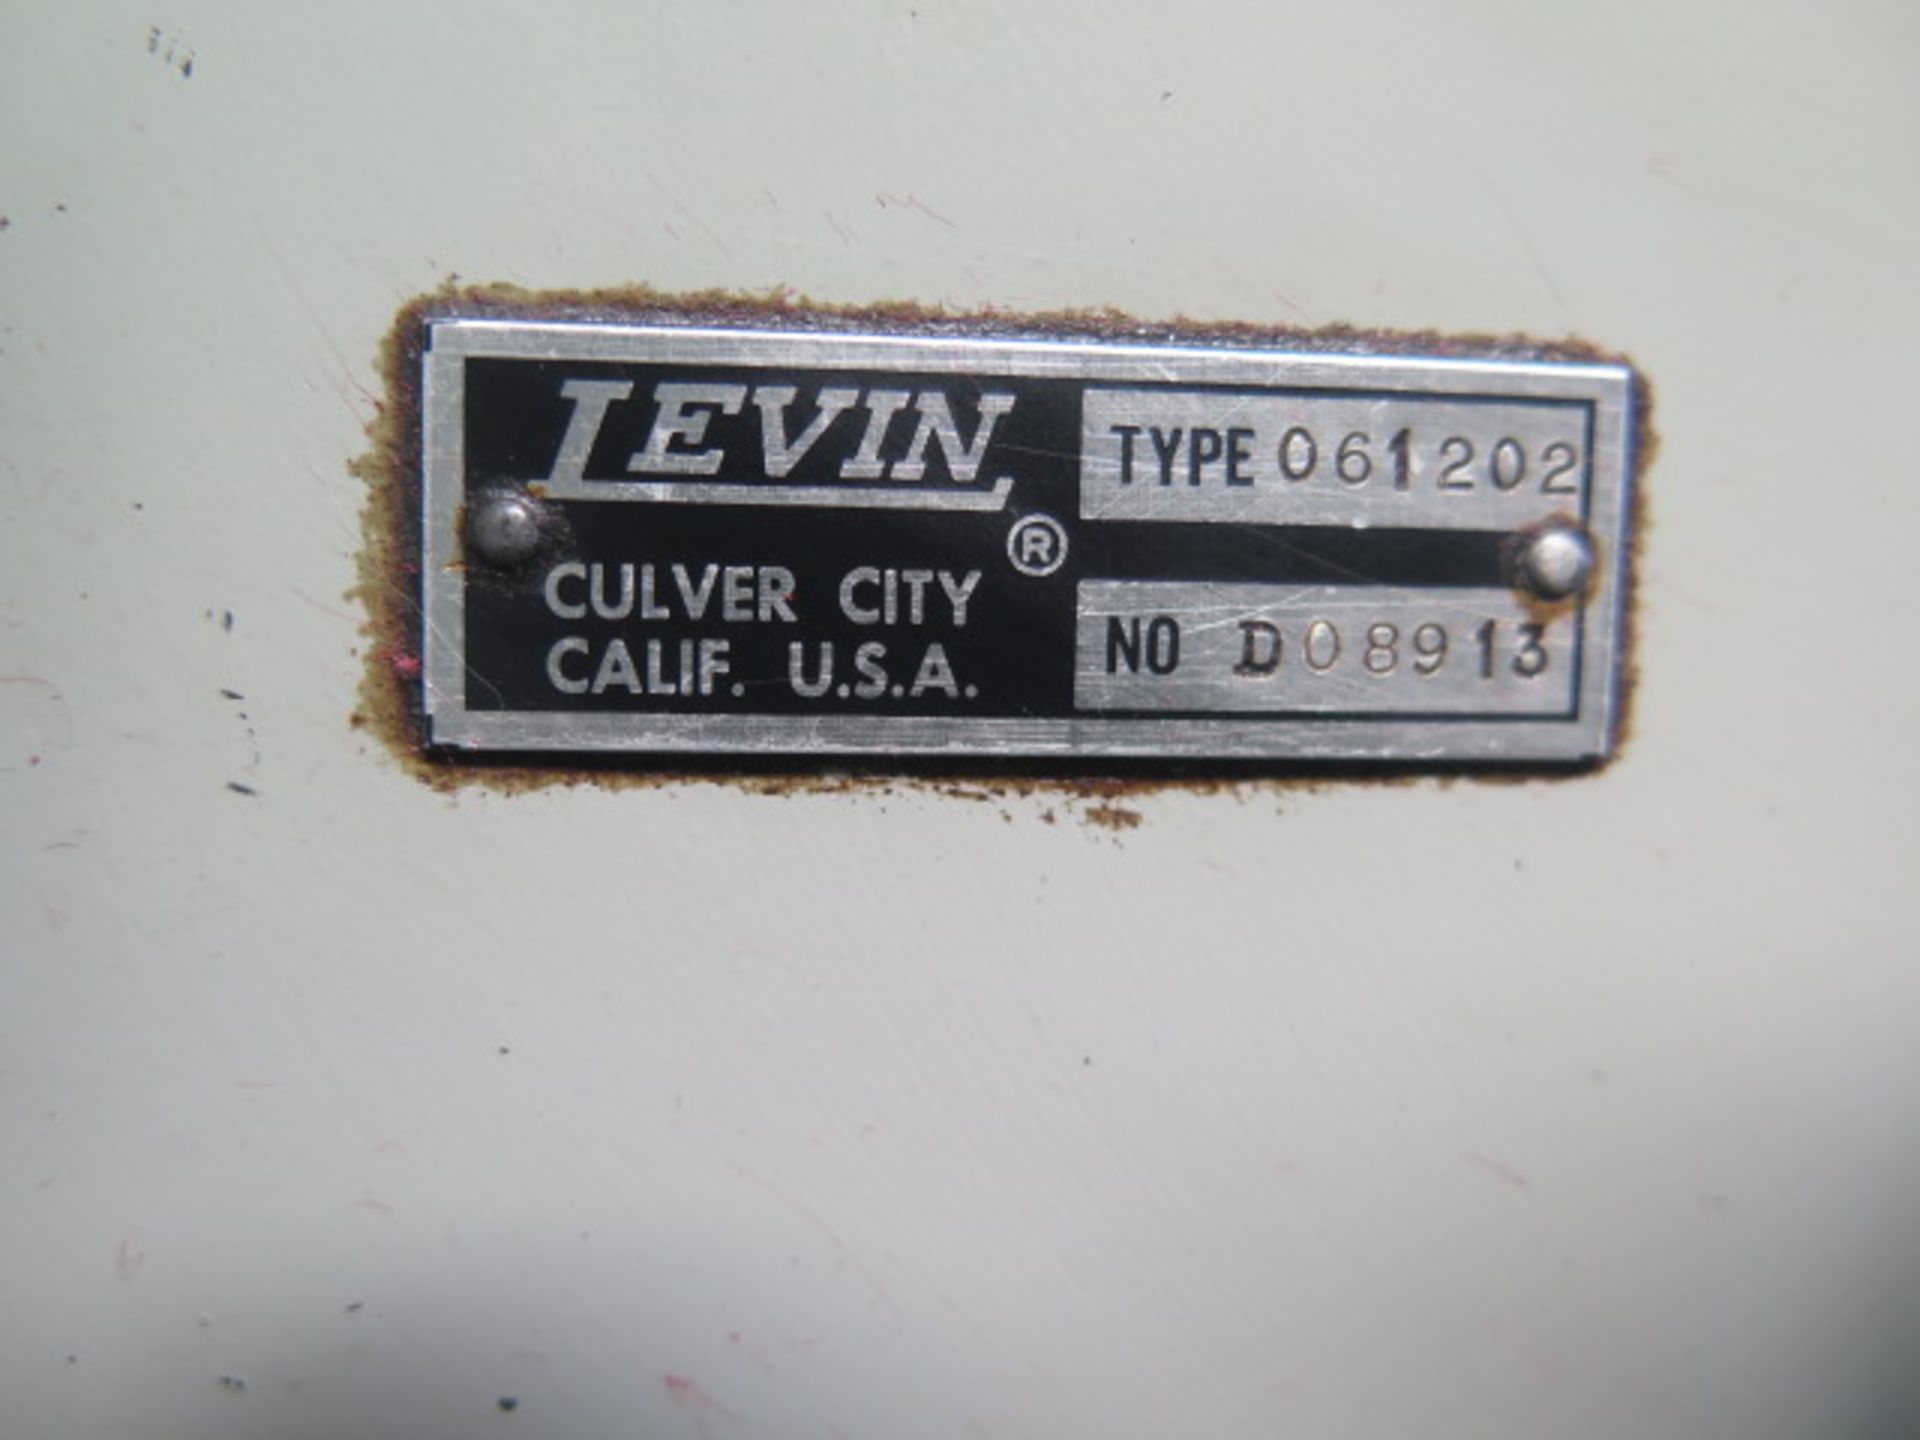 Levin Type 061202 Jewelers Lathe s/n D08913 w/ Cross Slide, Tailstock, Adjustable Spindle RPM - Image 6 of 11